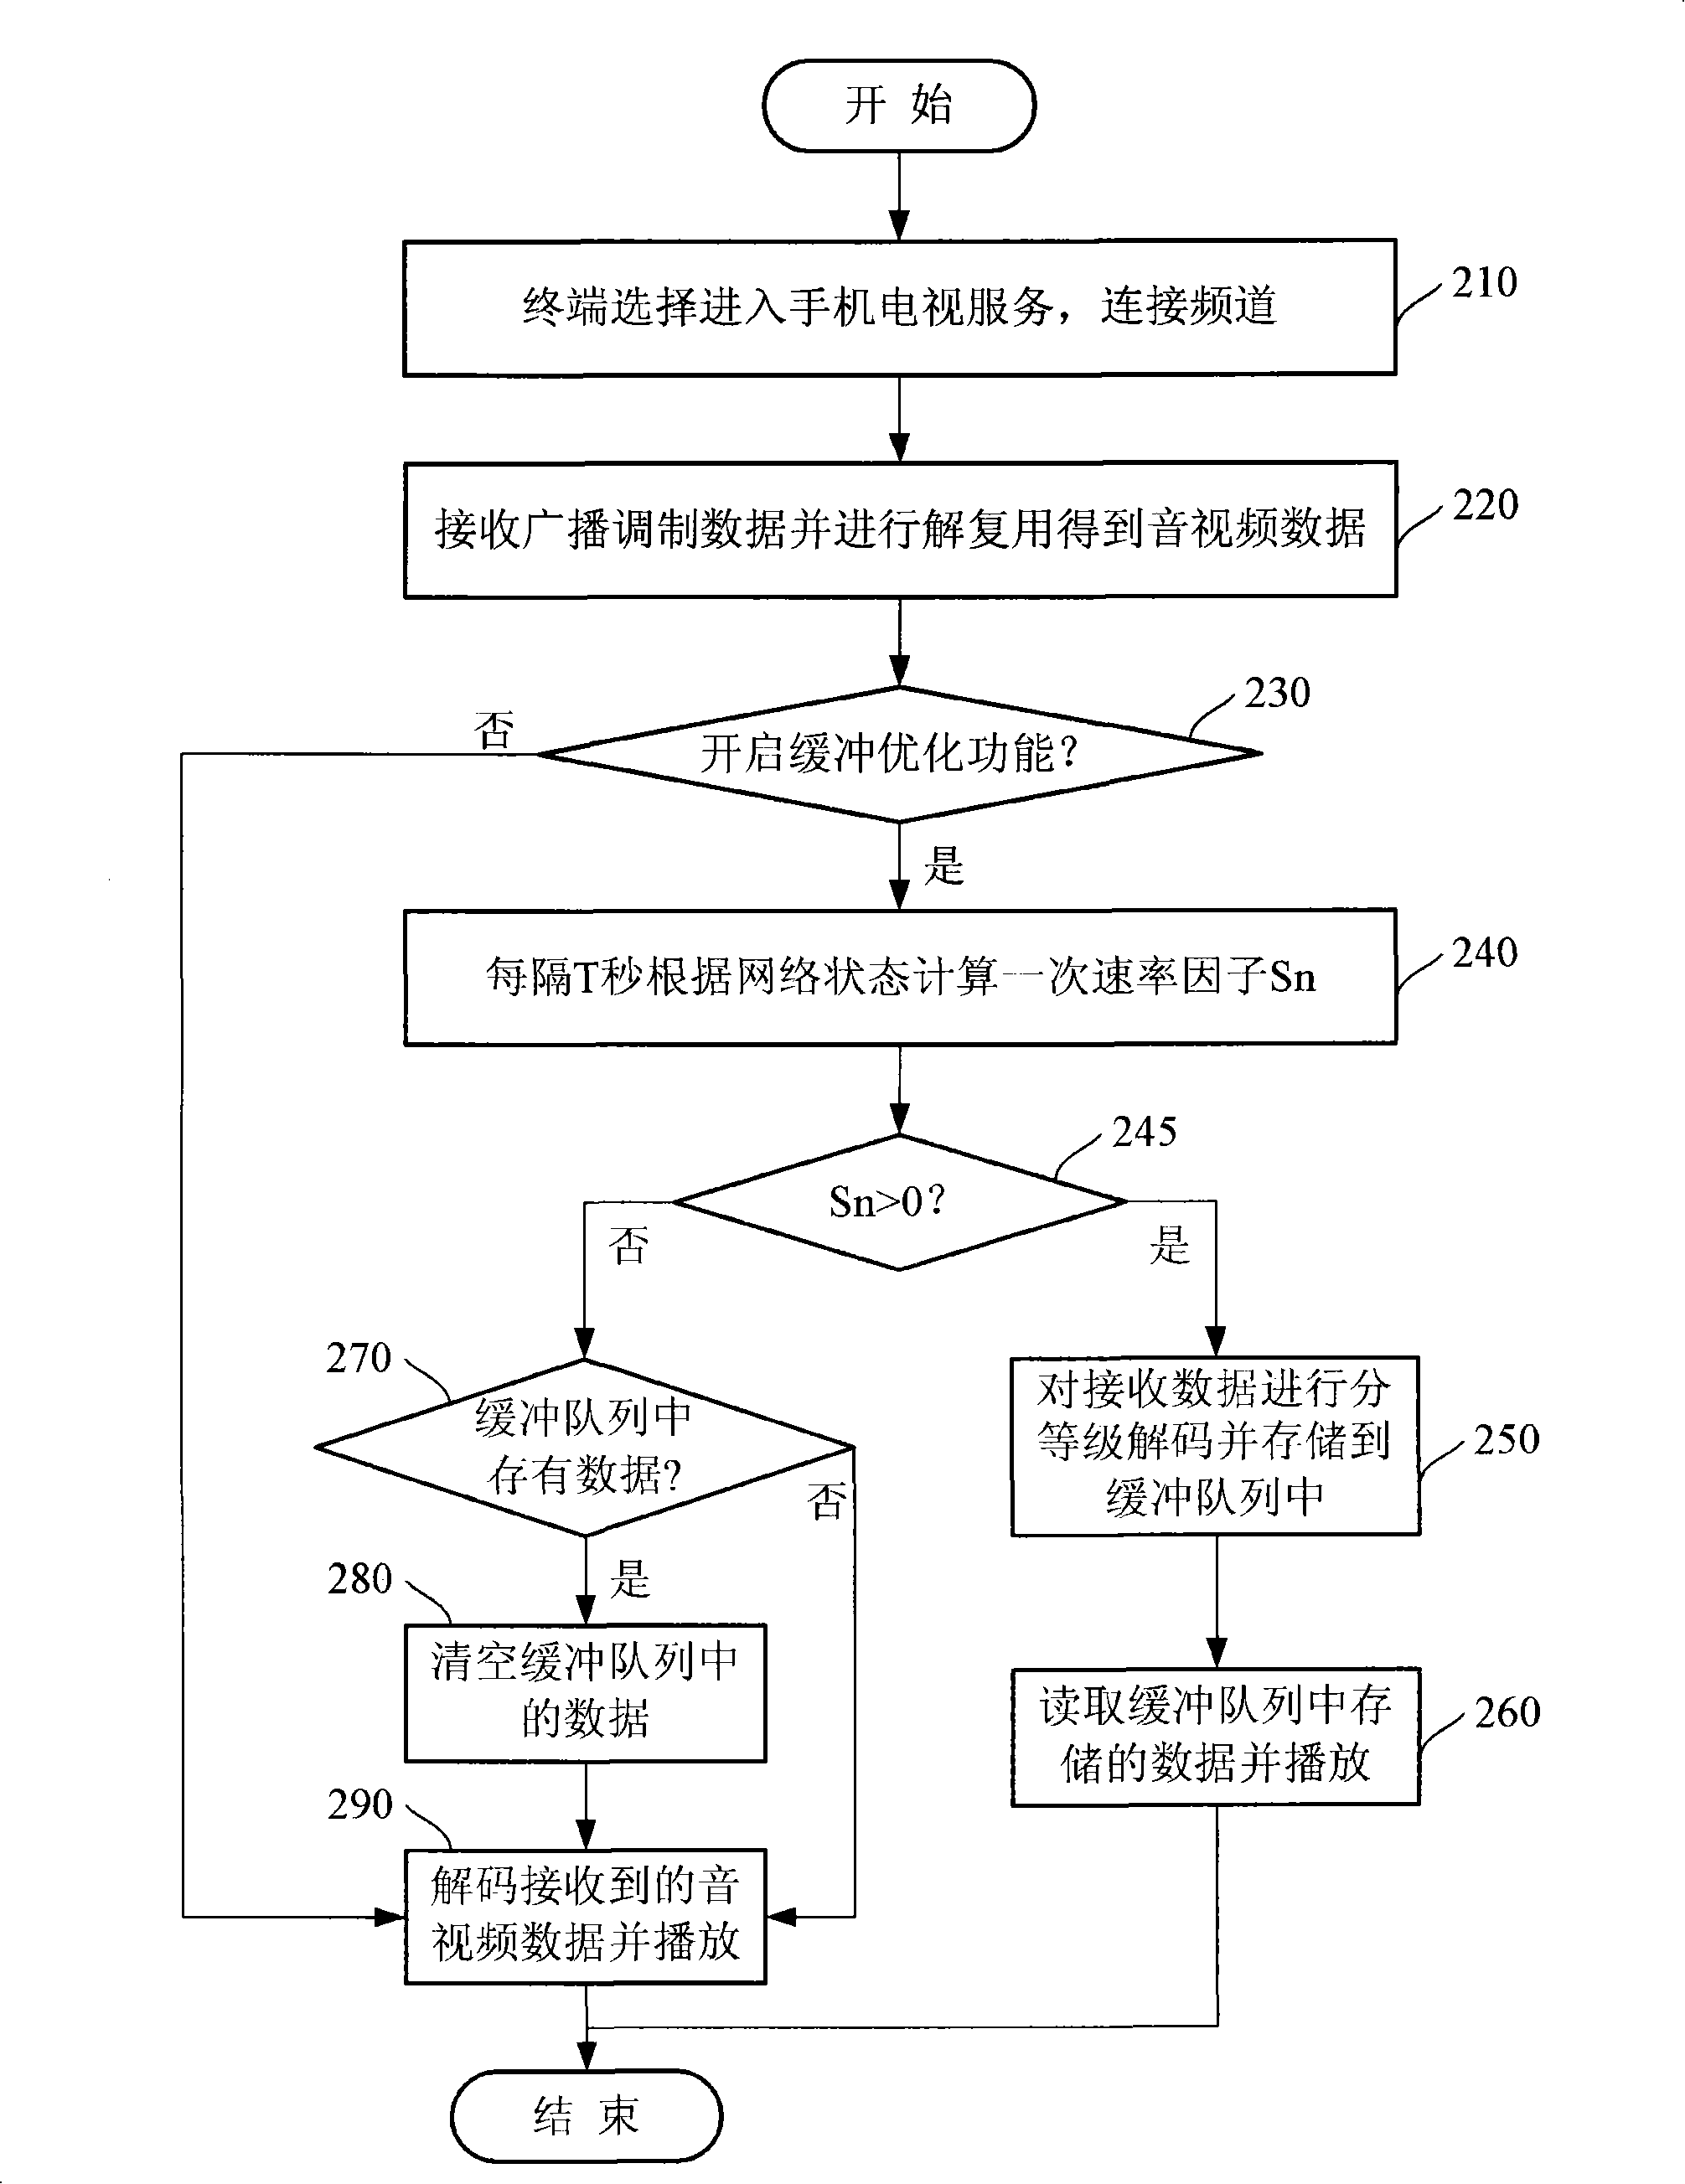 Method for self-adaption adjusting receiving speed to buffer play by a mobile multimedia broadcast terminal